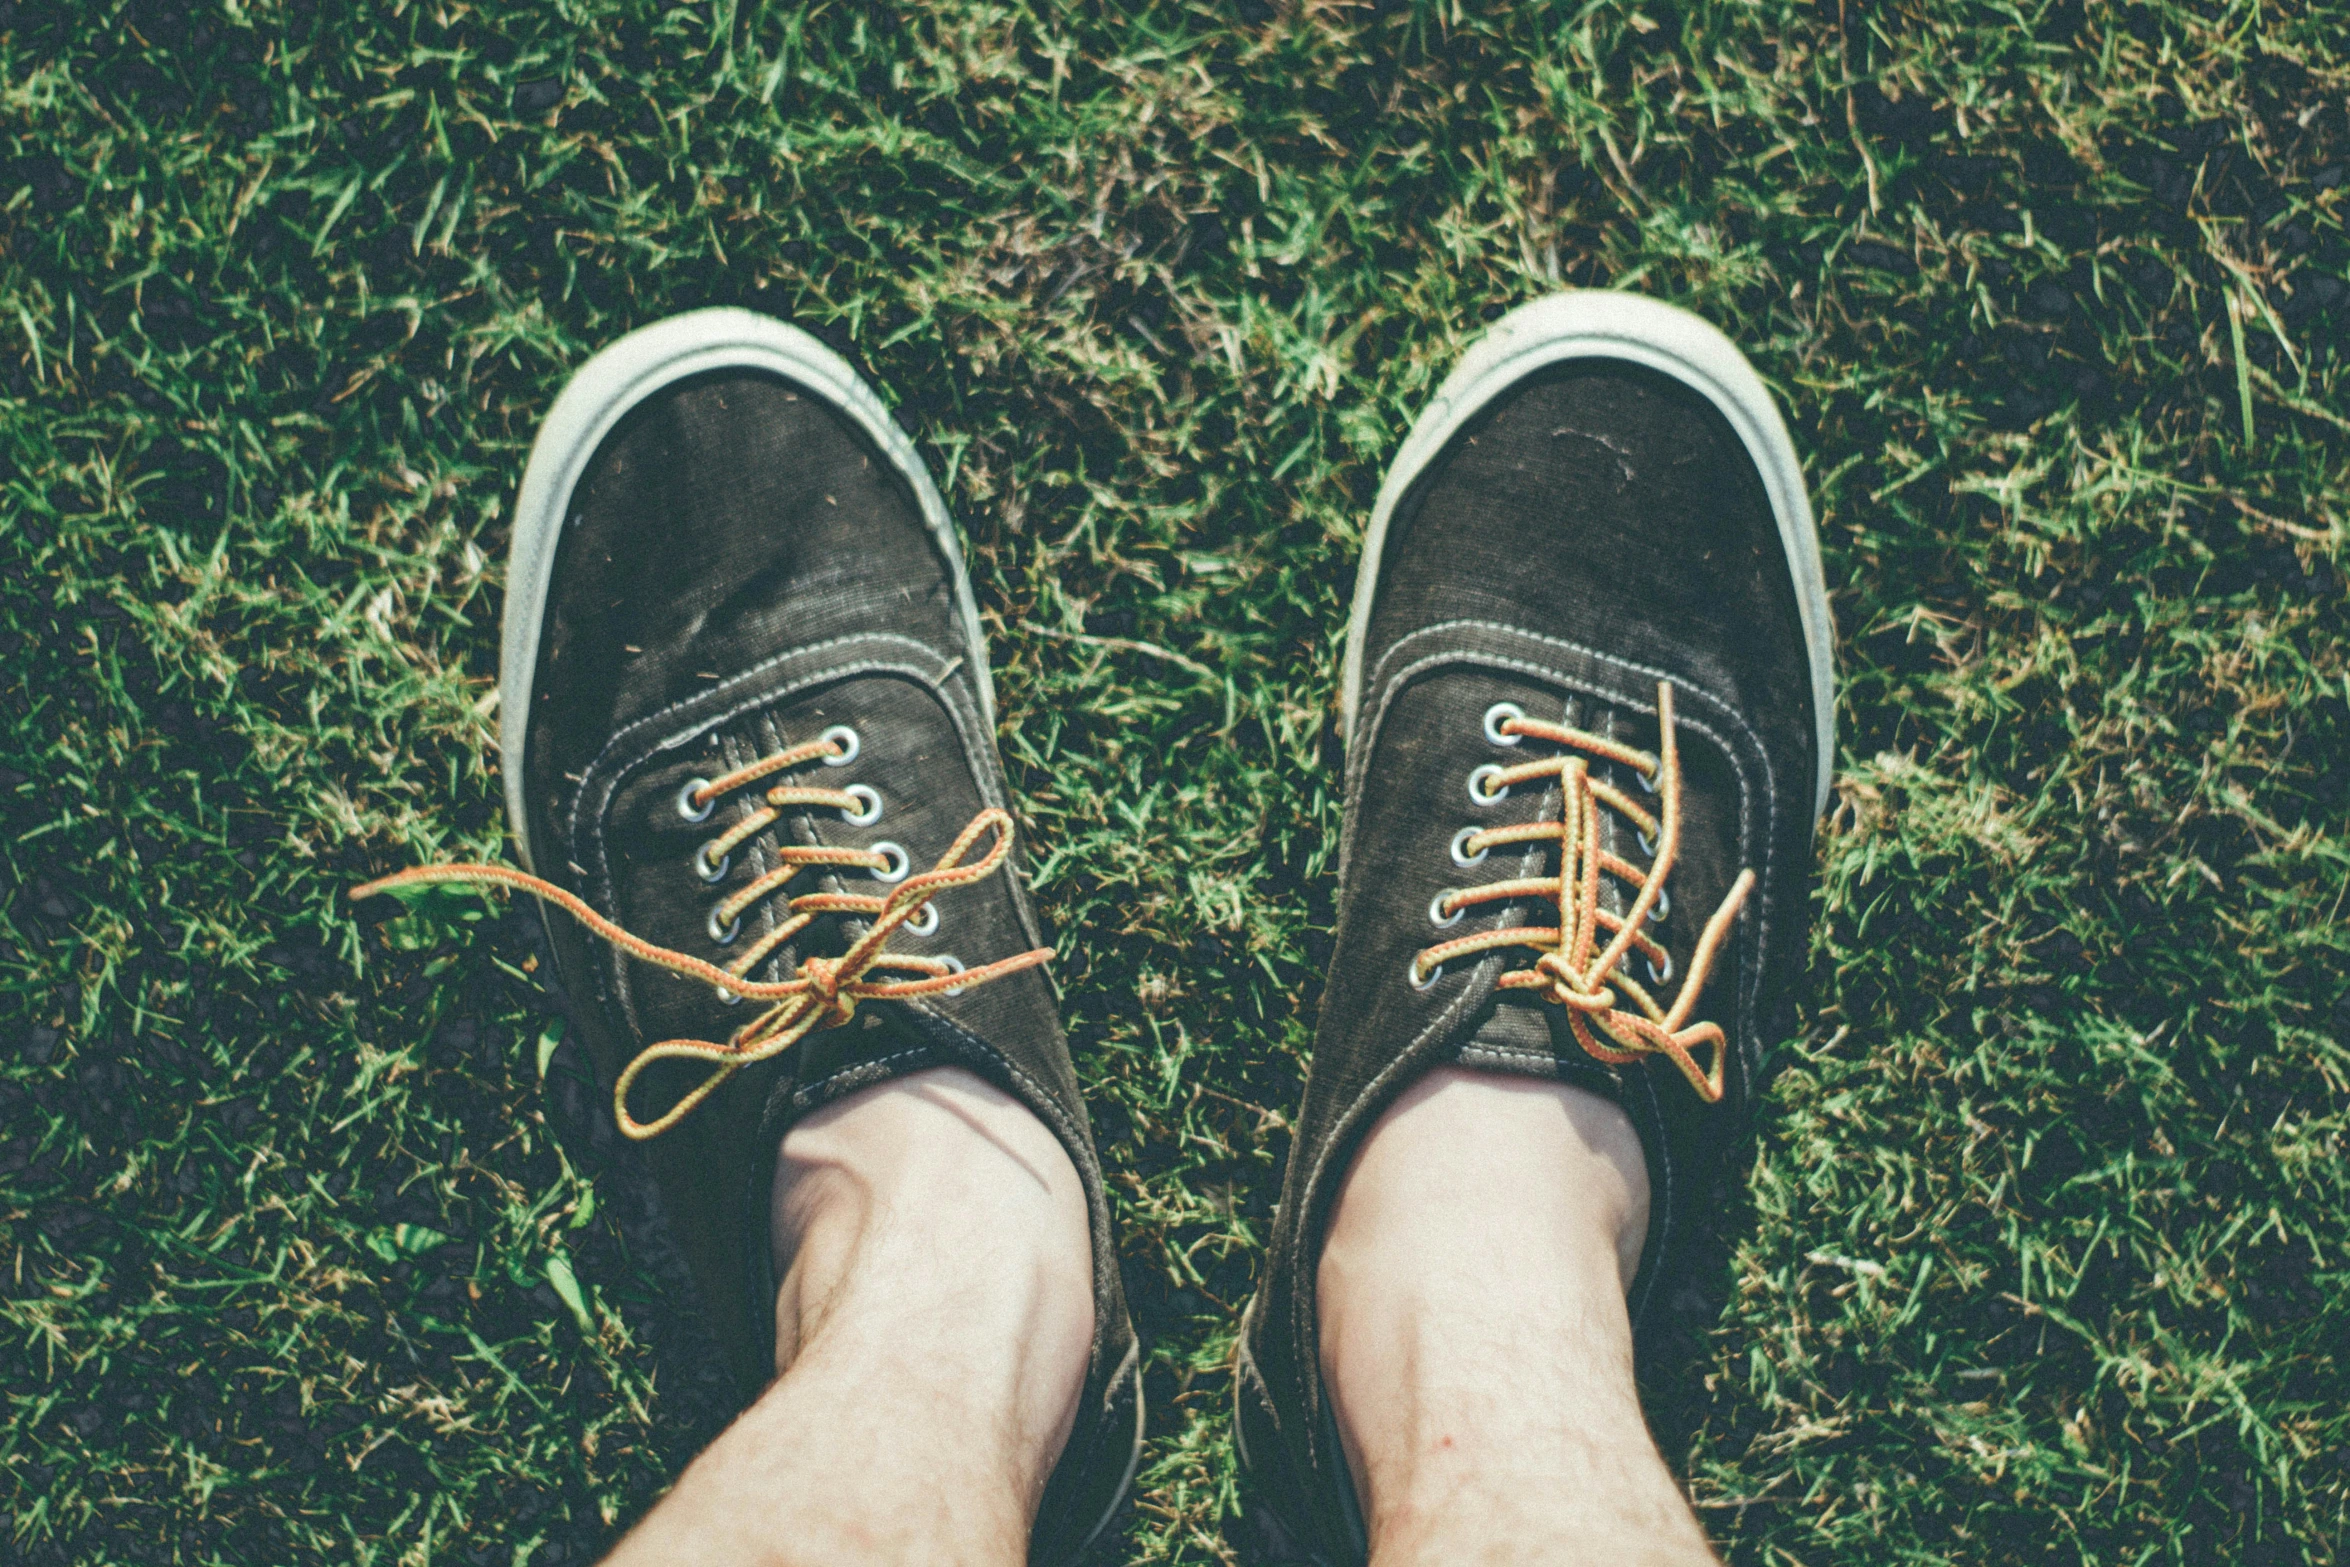 person in grey tennis shoes standing on grass